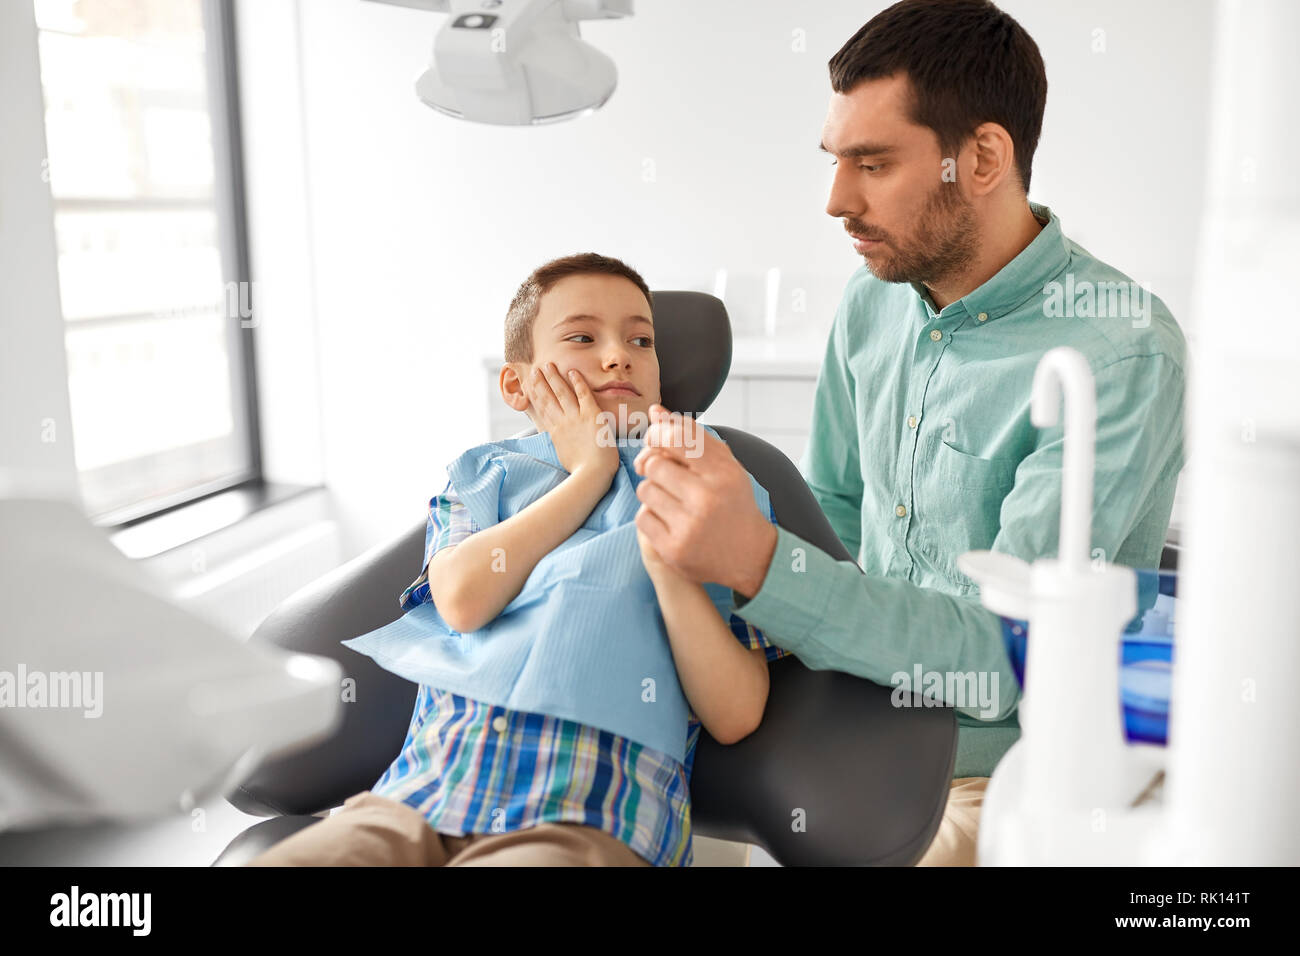 father supporting son at dental clinic Stock Photo